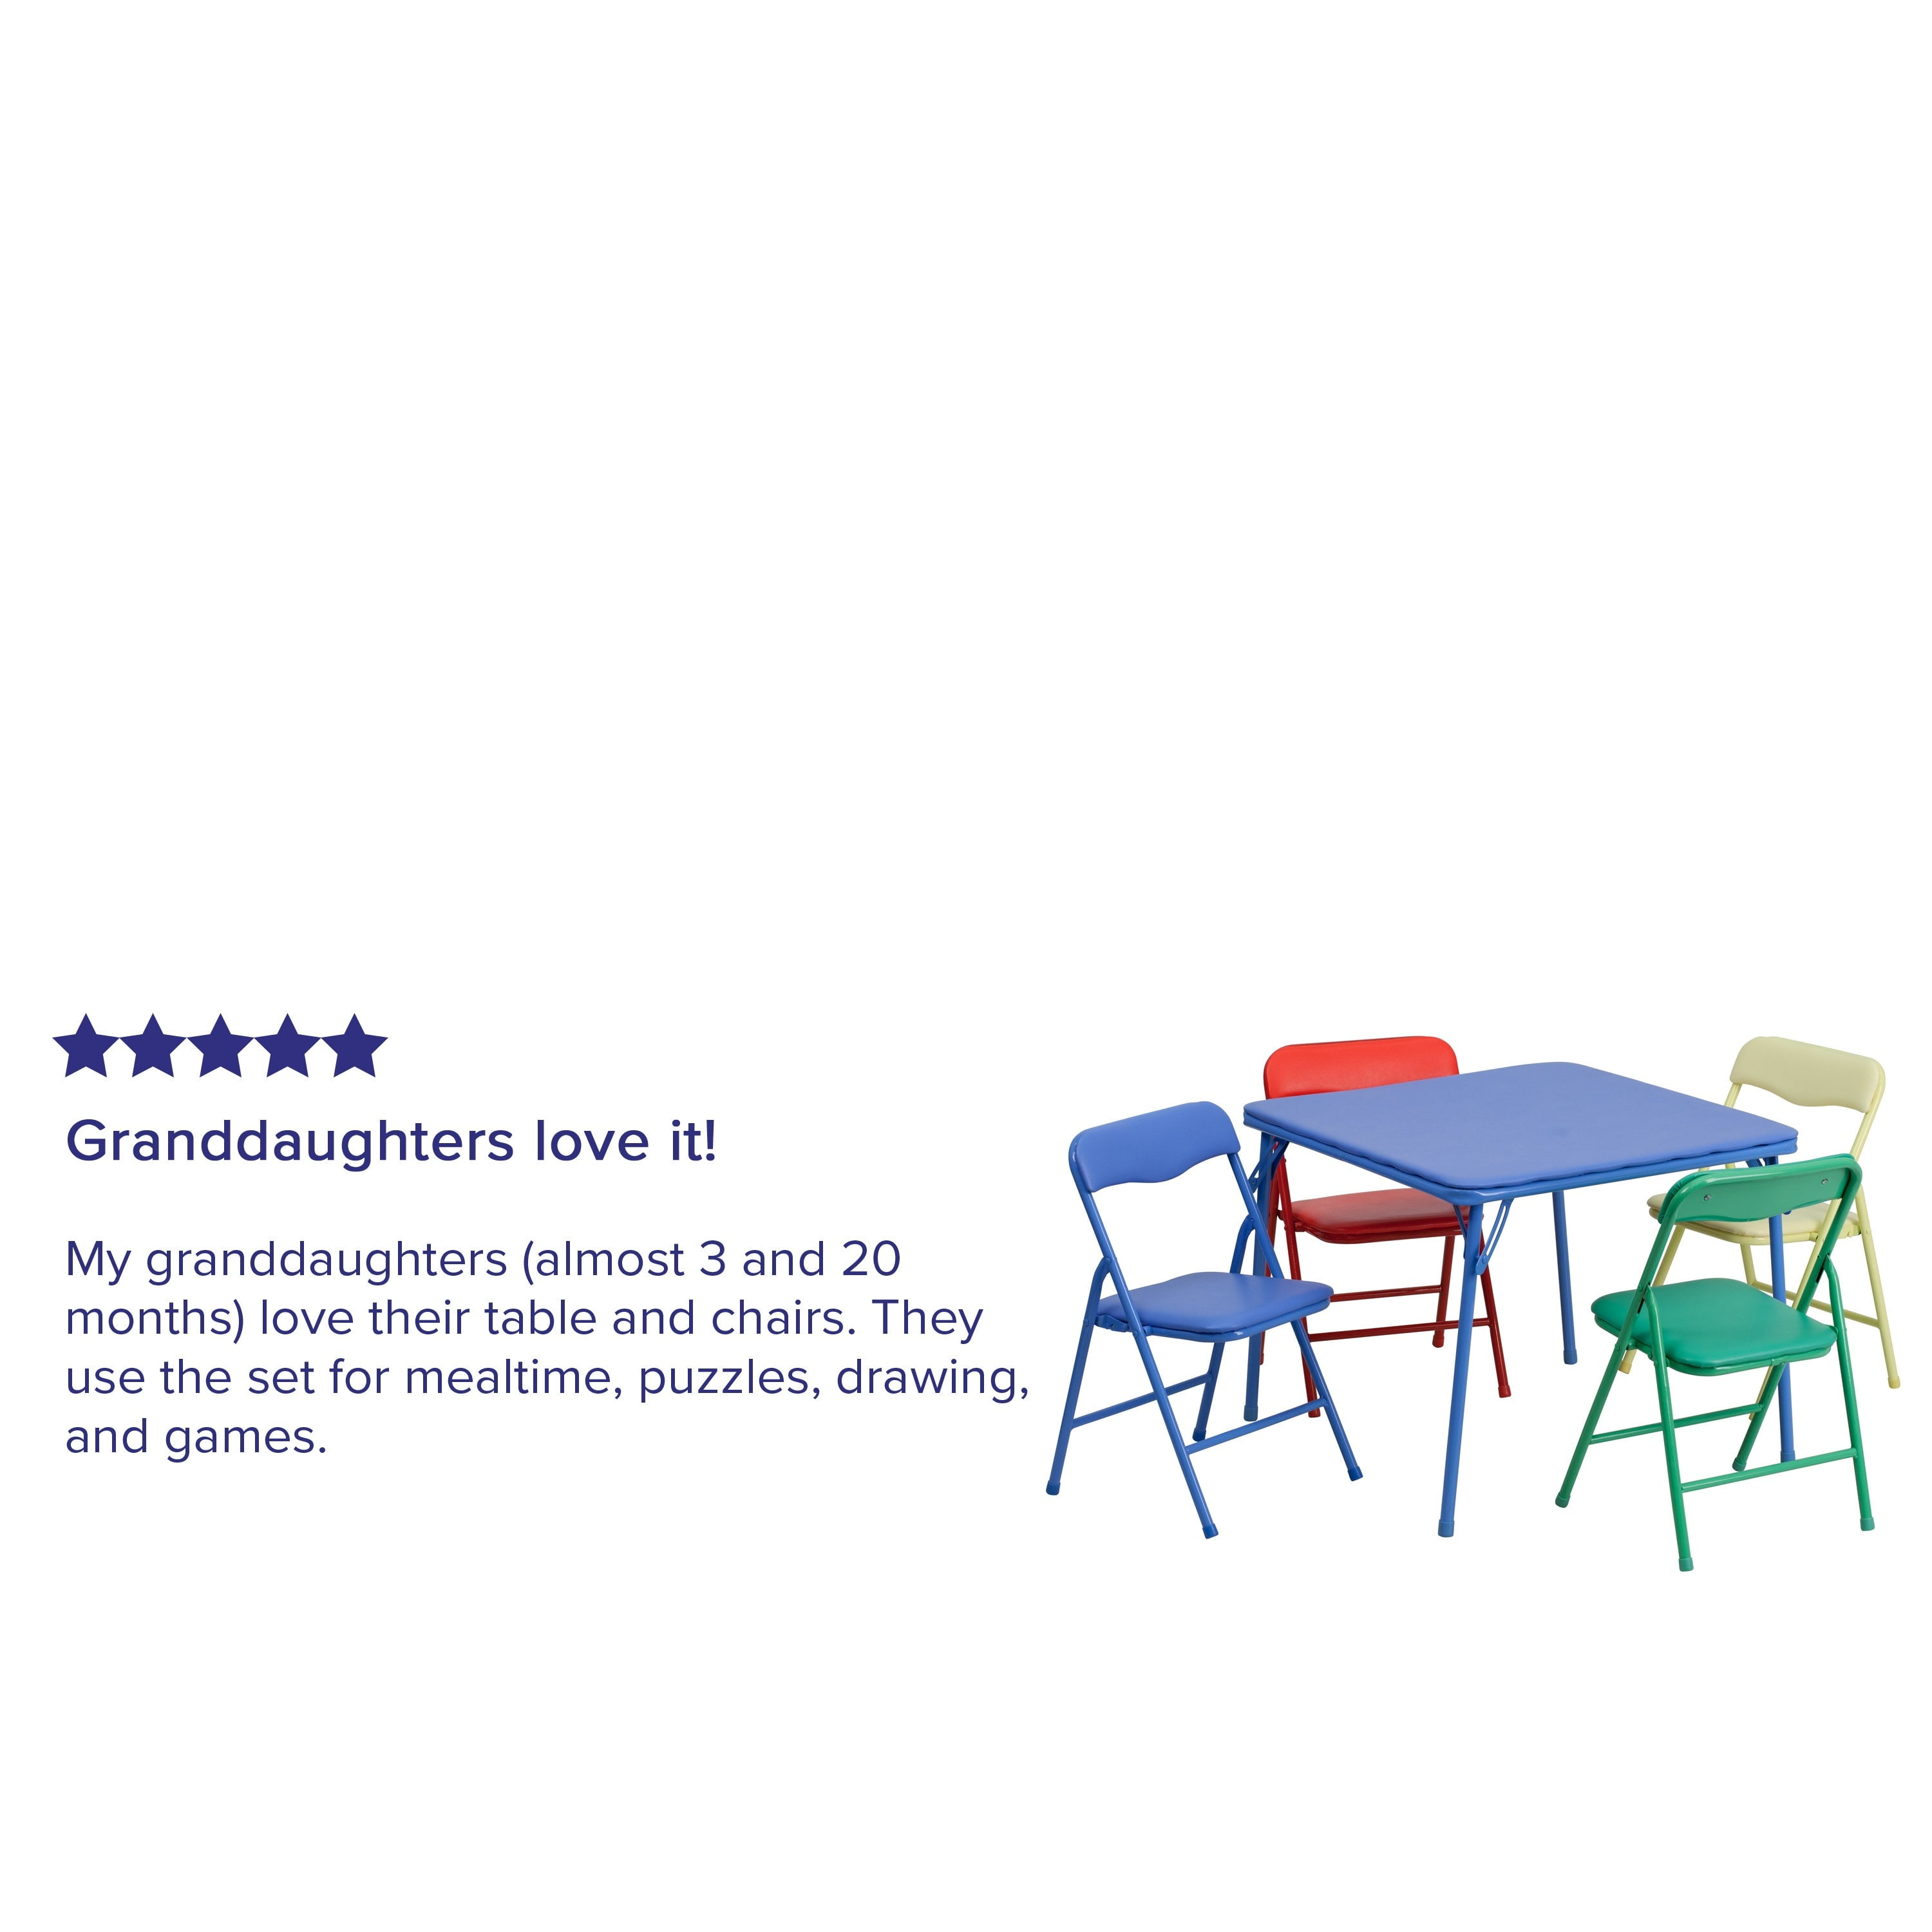 childrens folding table and chairs walmart